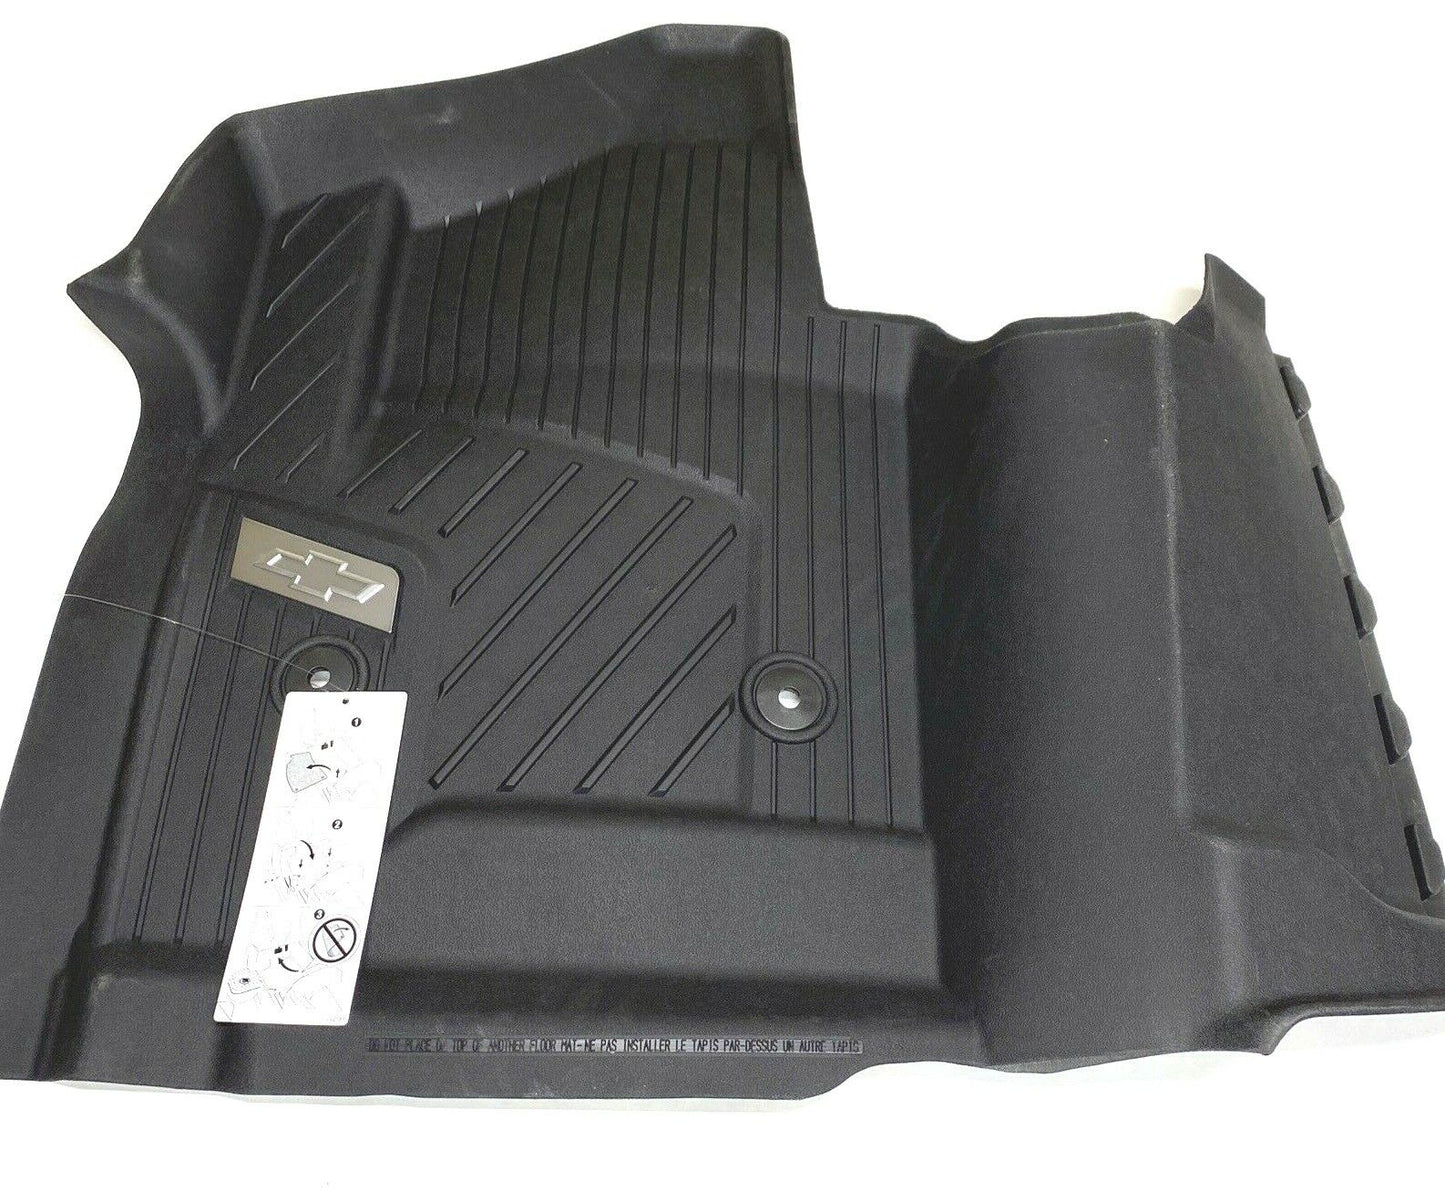 New OEM GM Chevy Silverado Front Floor Liner All-Weather 2016-18 84357879